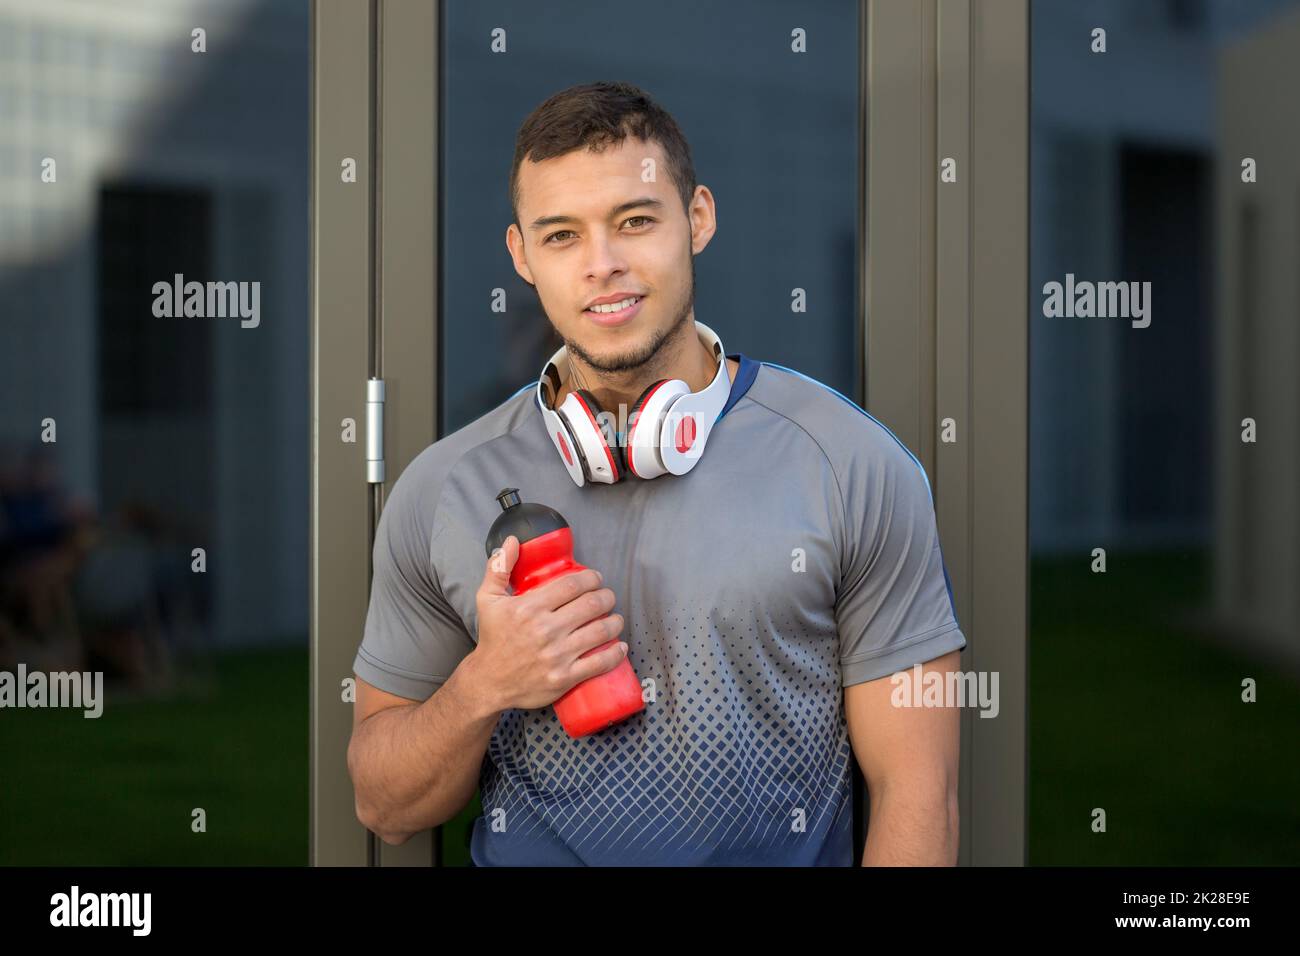 Smiling young latin man water bottle runner outdoor sports fitness training Stock Photo